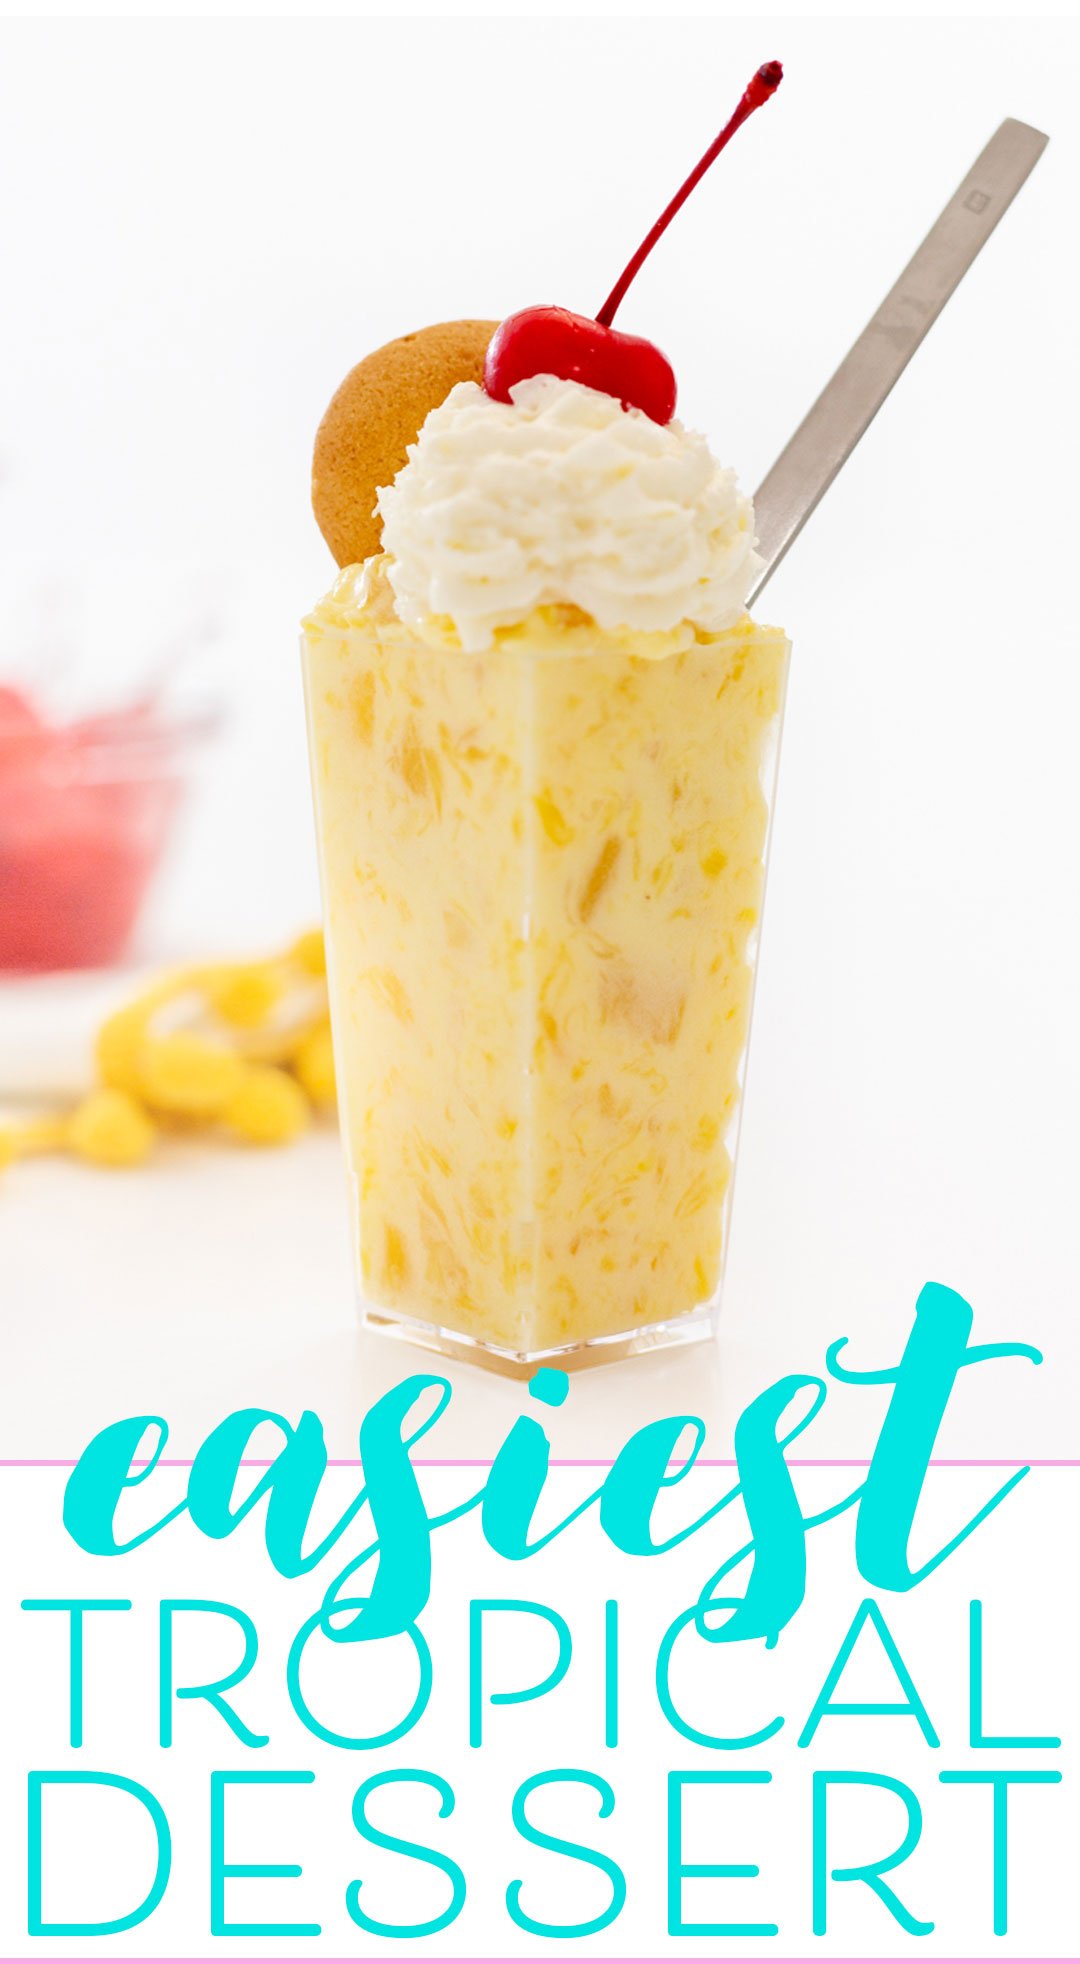 Easiest Tropical Dessert with only 3 ingredients. Pineapple and coconut = yum!